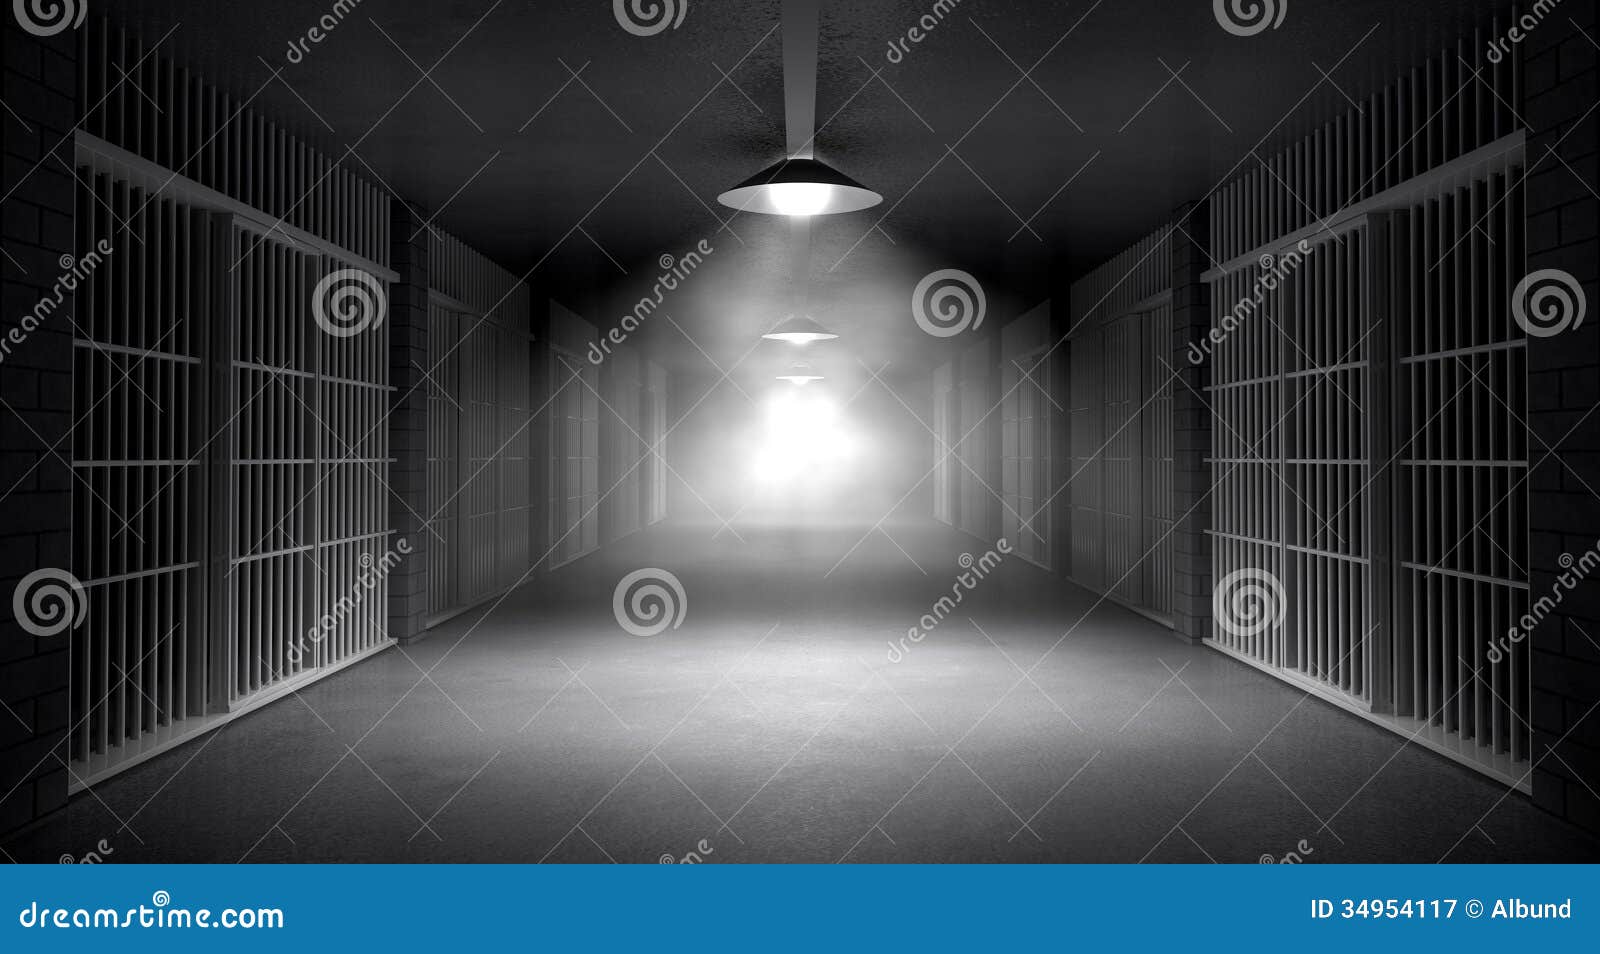 haunted jail corridor and cells